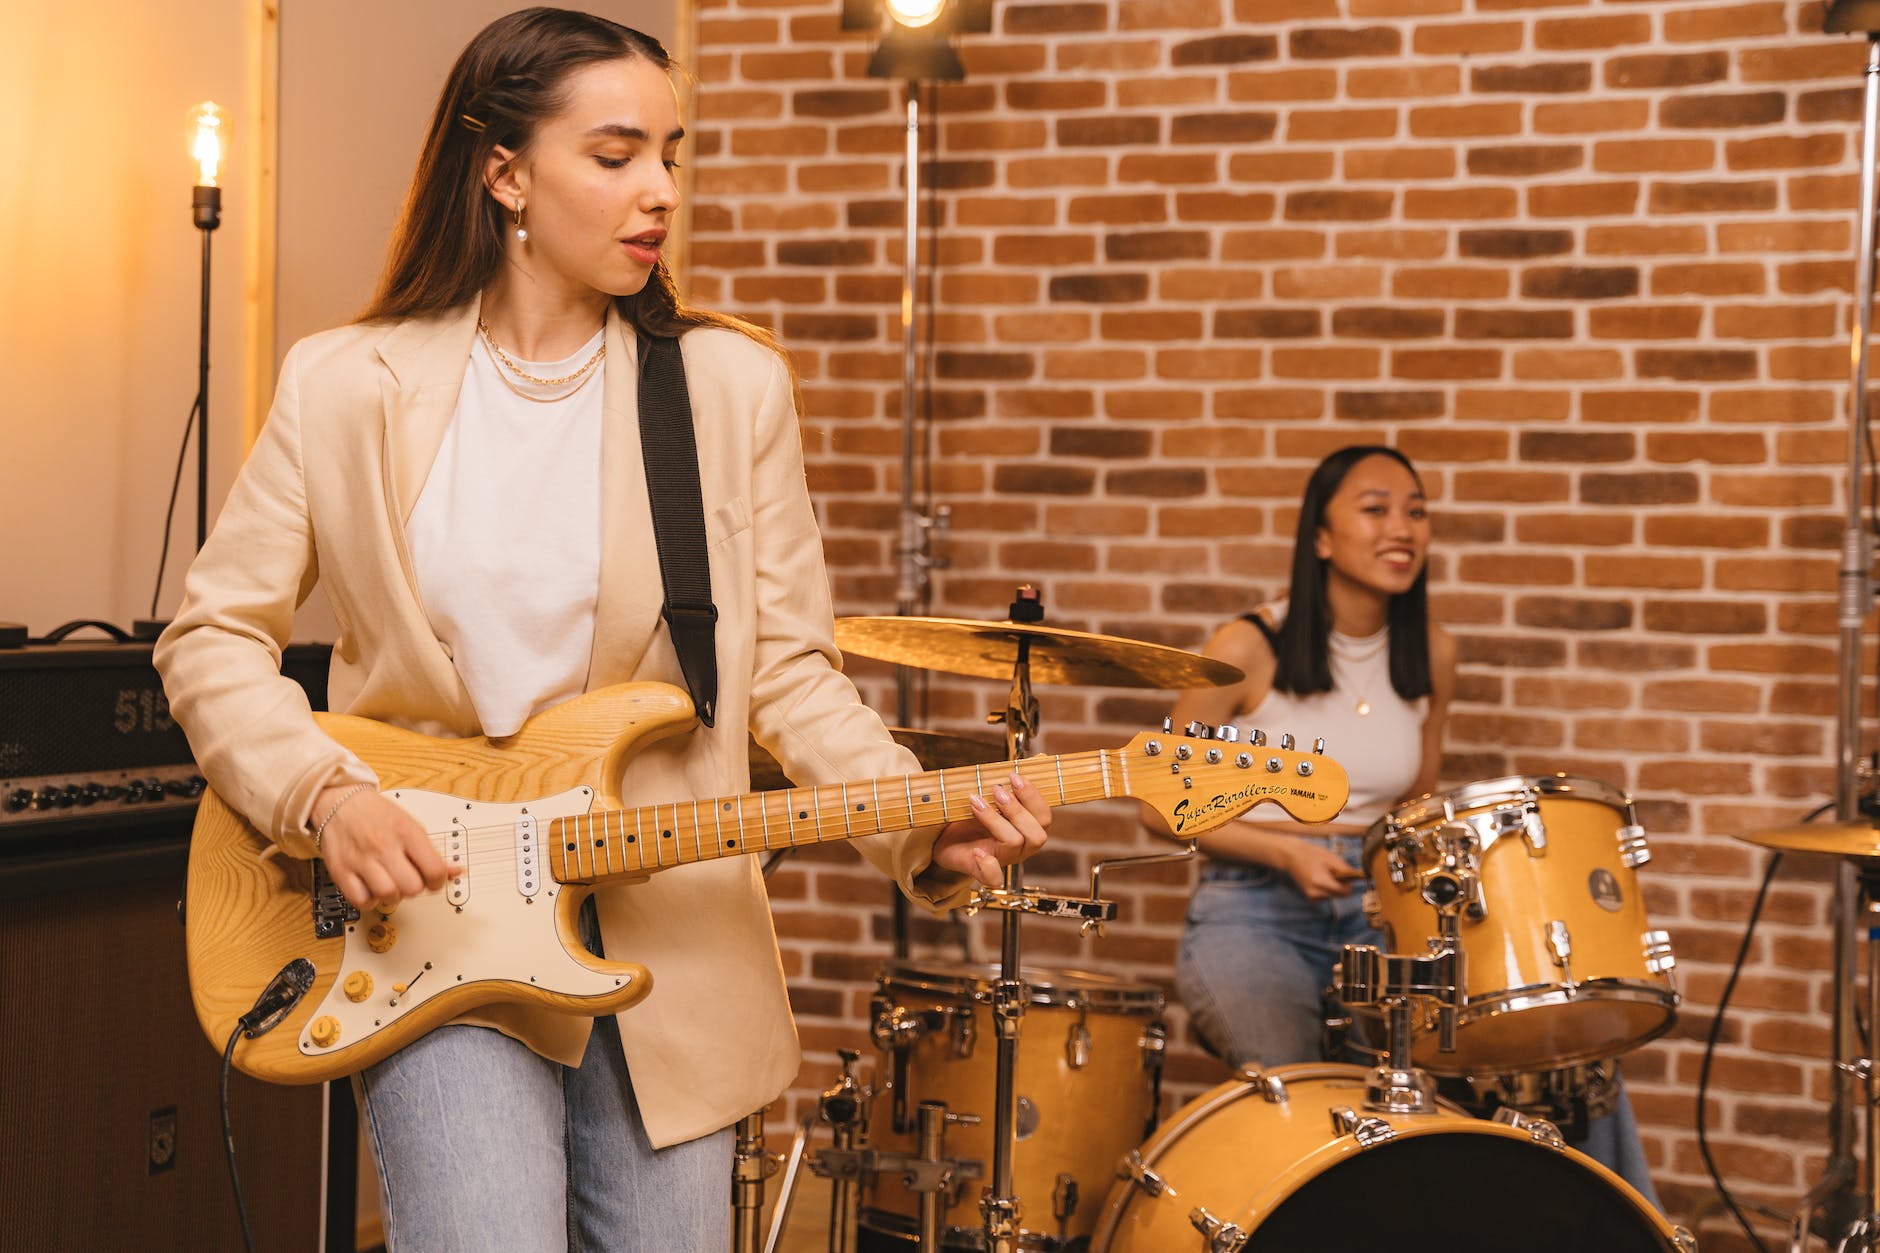 woman playing guitar and woman playing drums